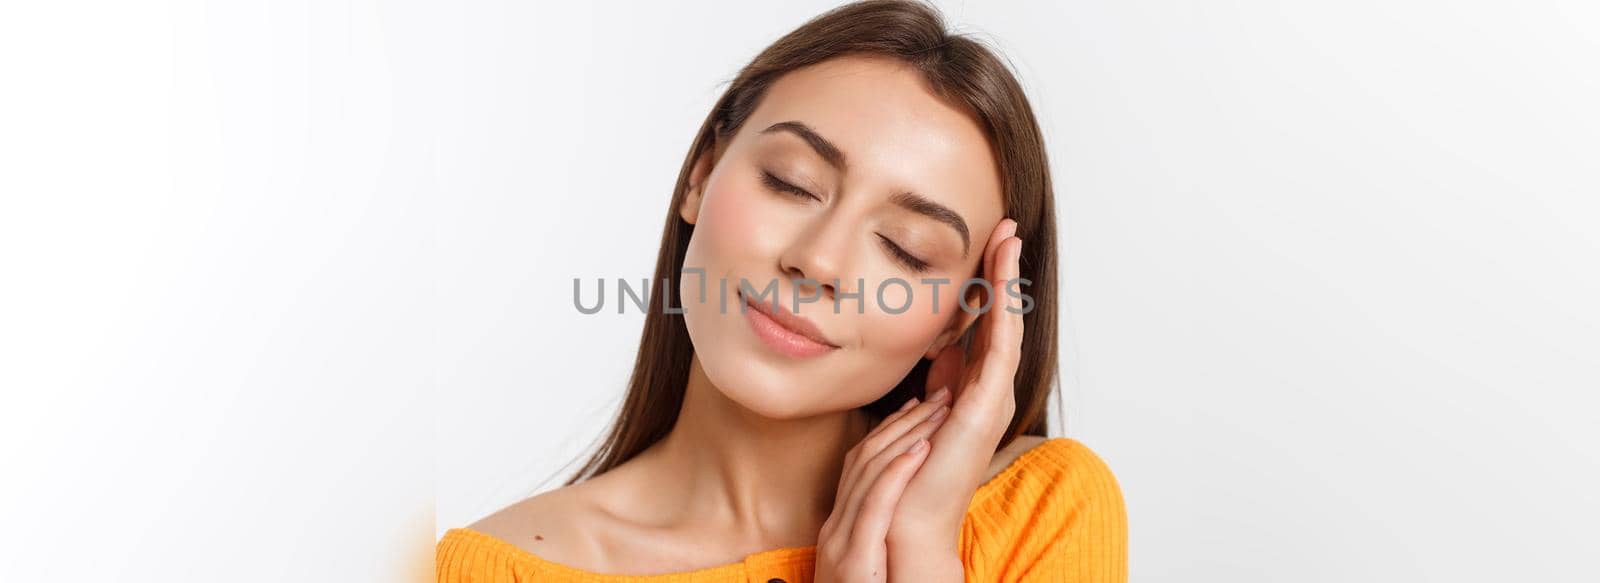 friendly smiling young woman with beatiful face portrait studio shot.